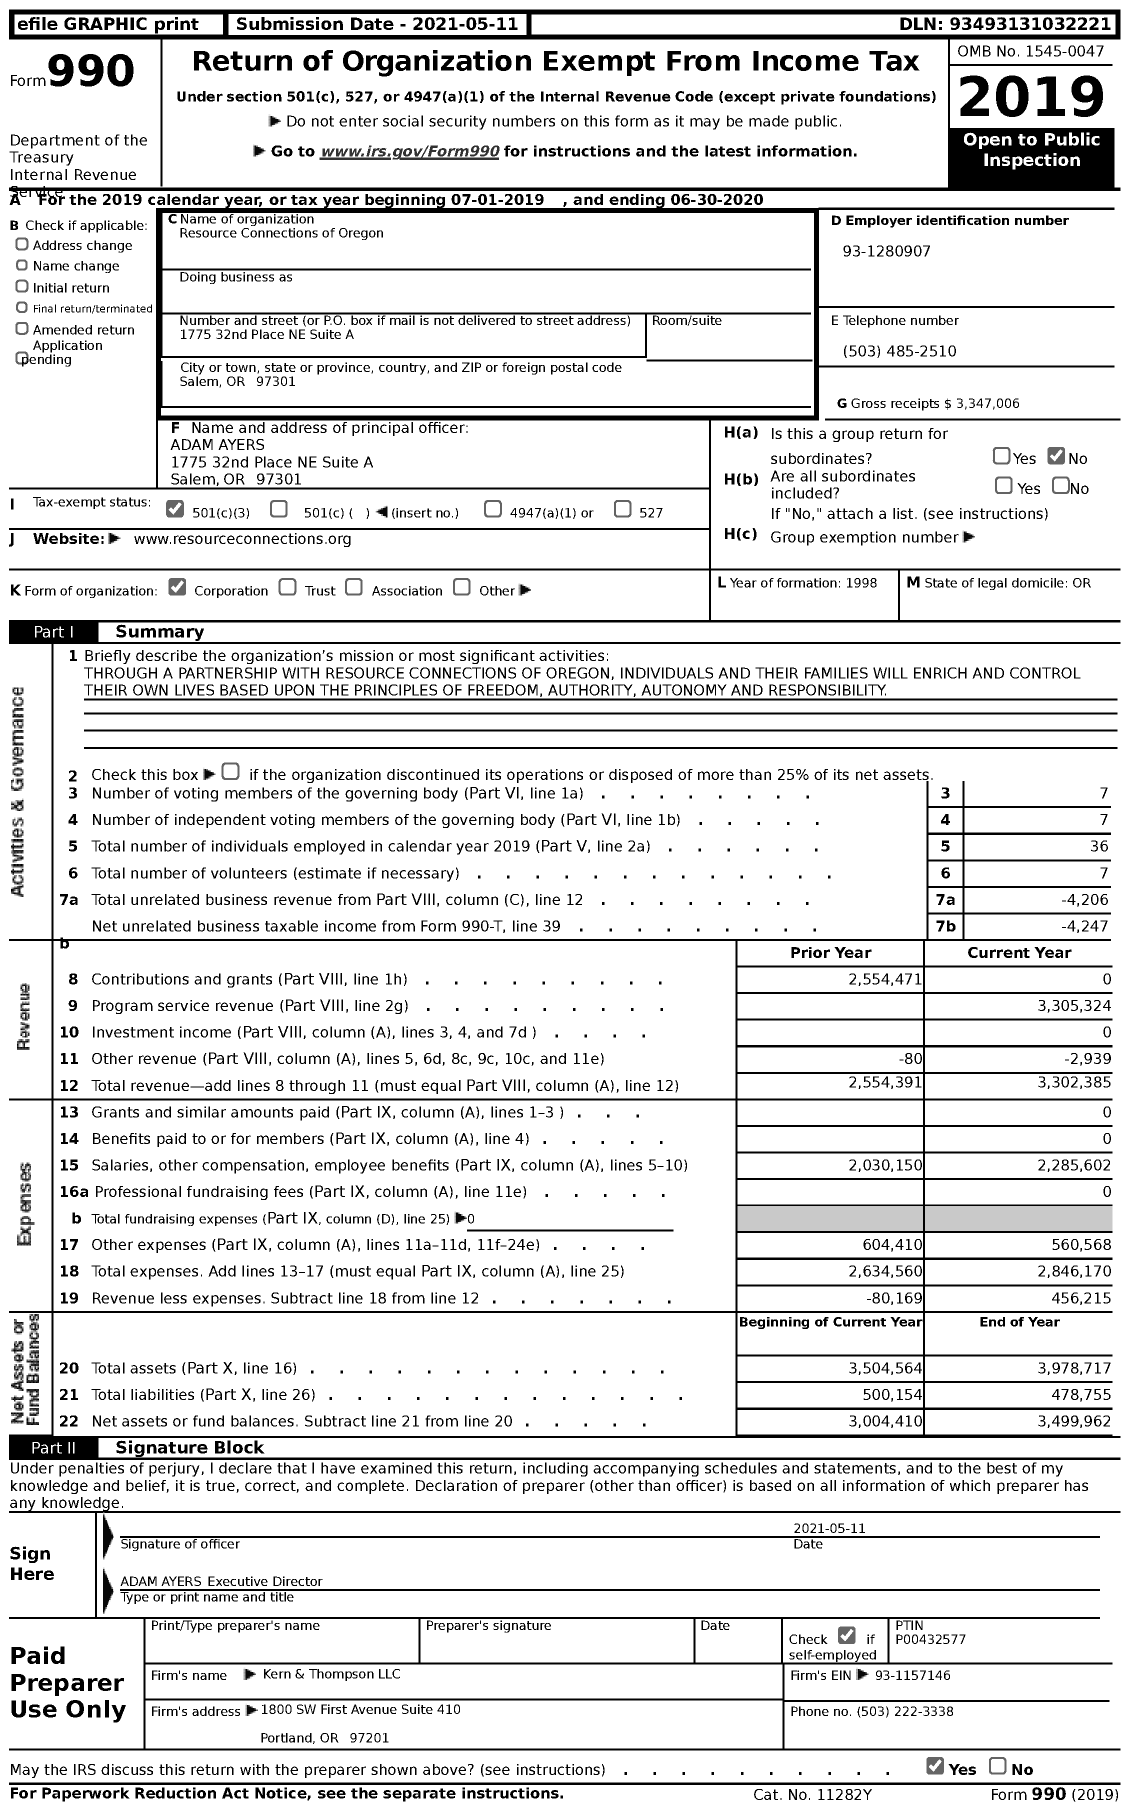 Image of first page of 2019 Form 990 for Resource Connections of Oregon (RCO)